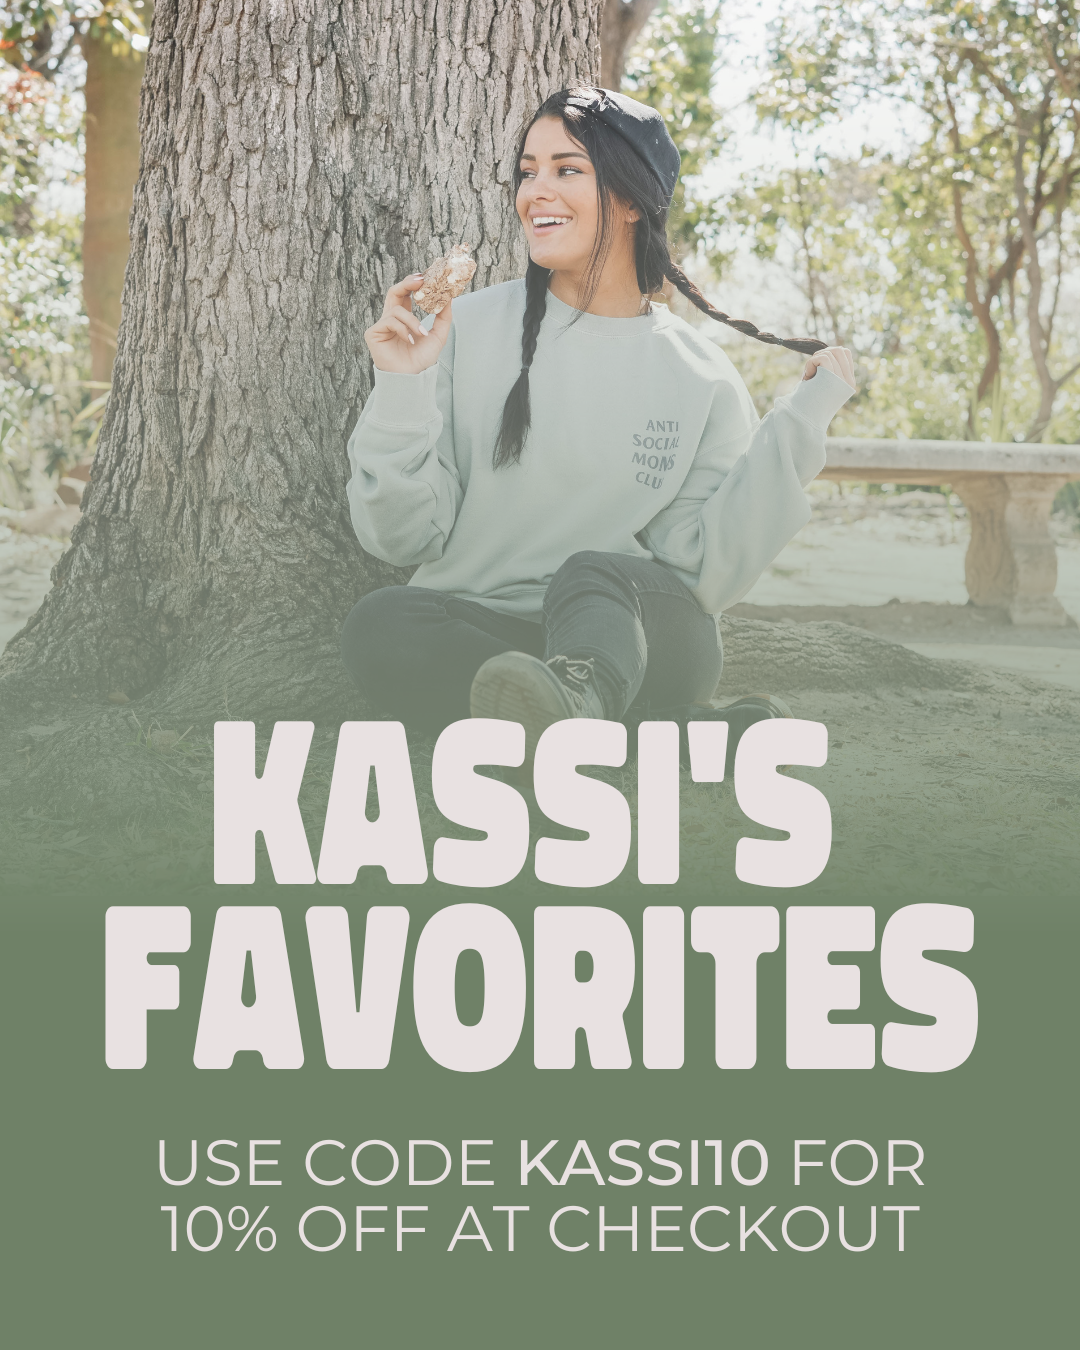 Kassi's Favorites! Use code KASSI10 for 10% off at checkout!